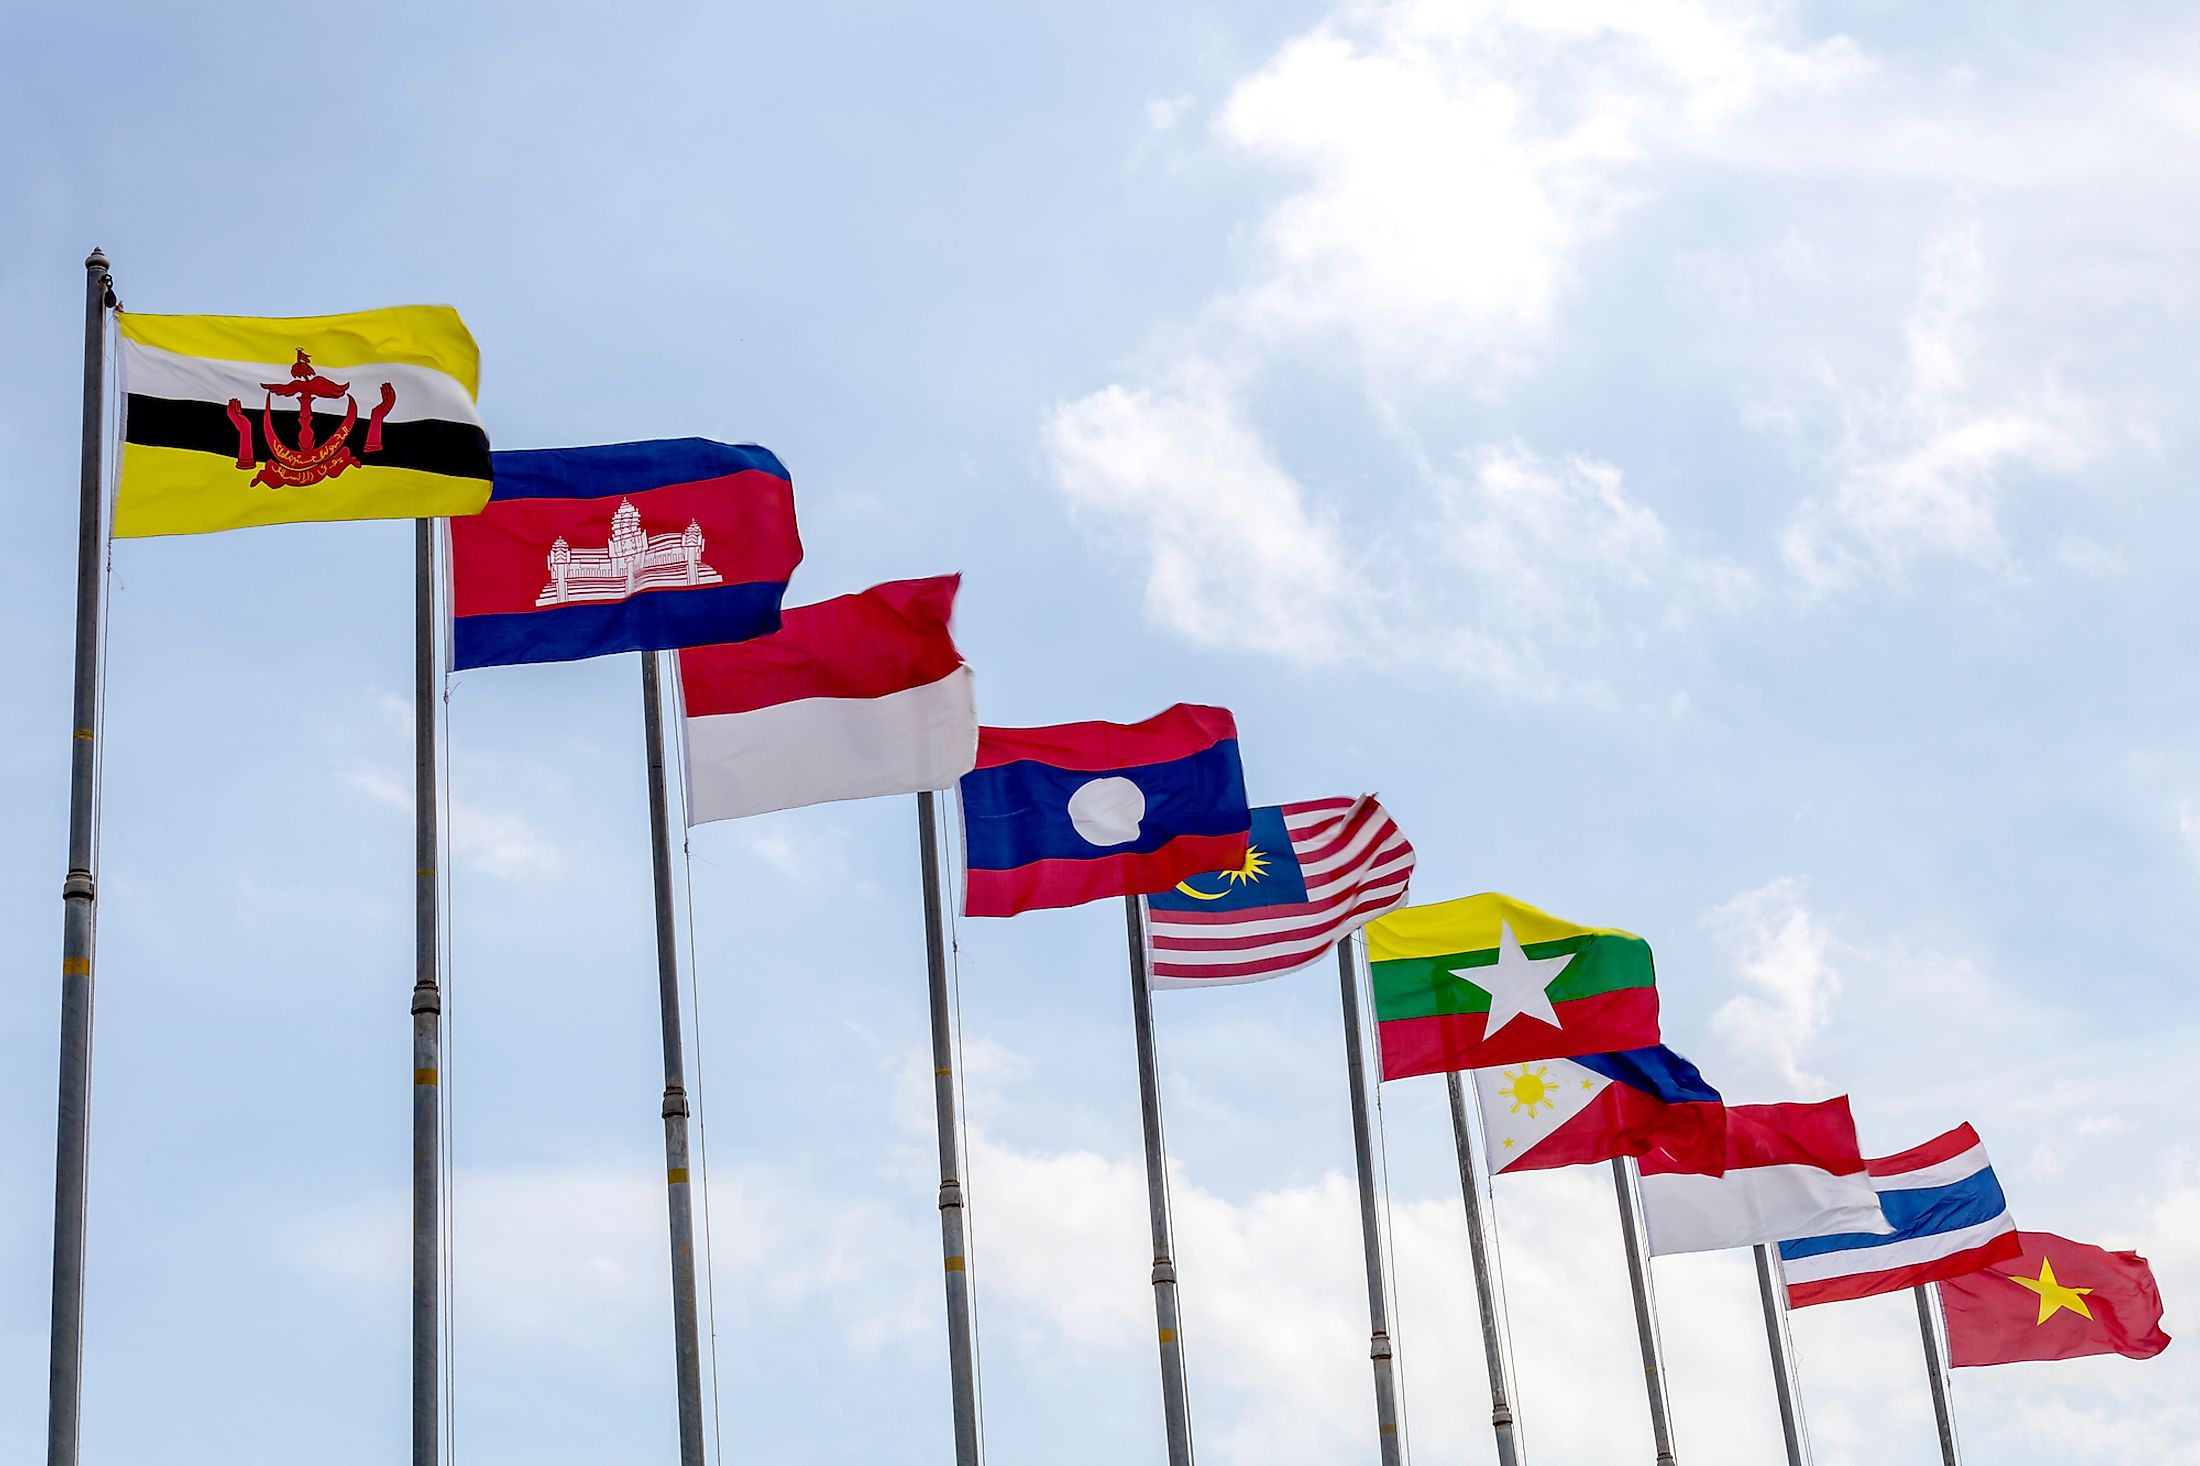 Flags of the 10 member countries of ASEAN.